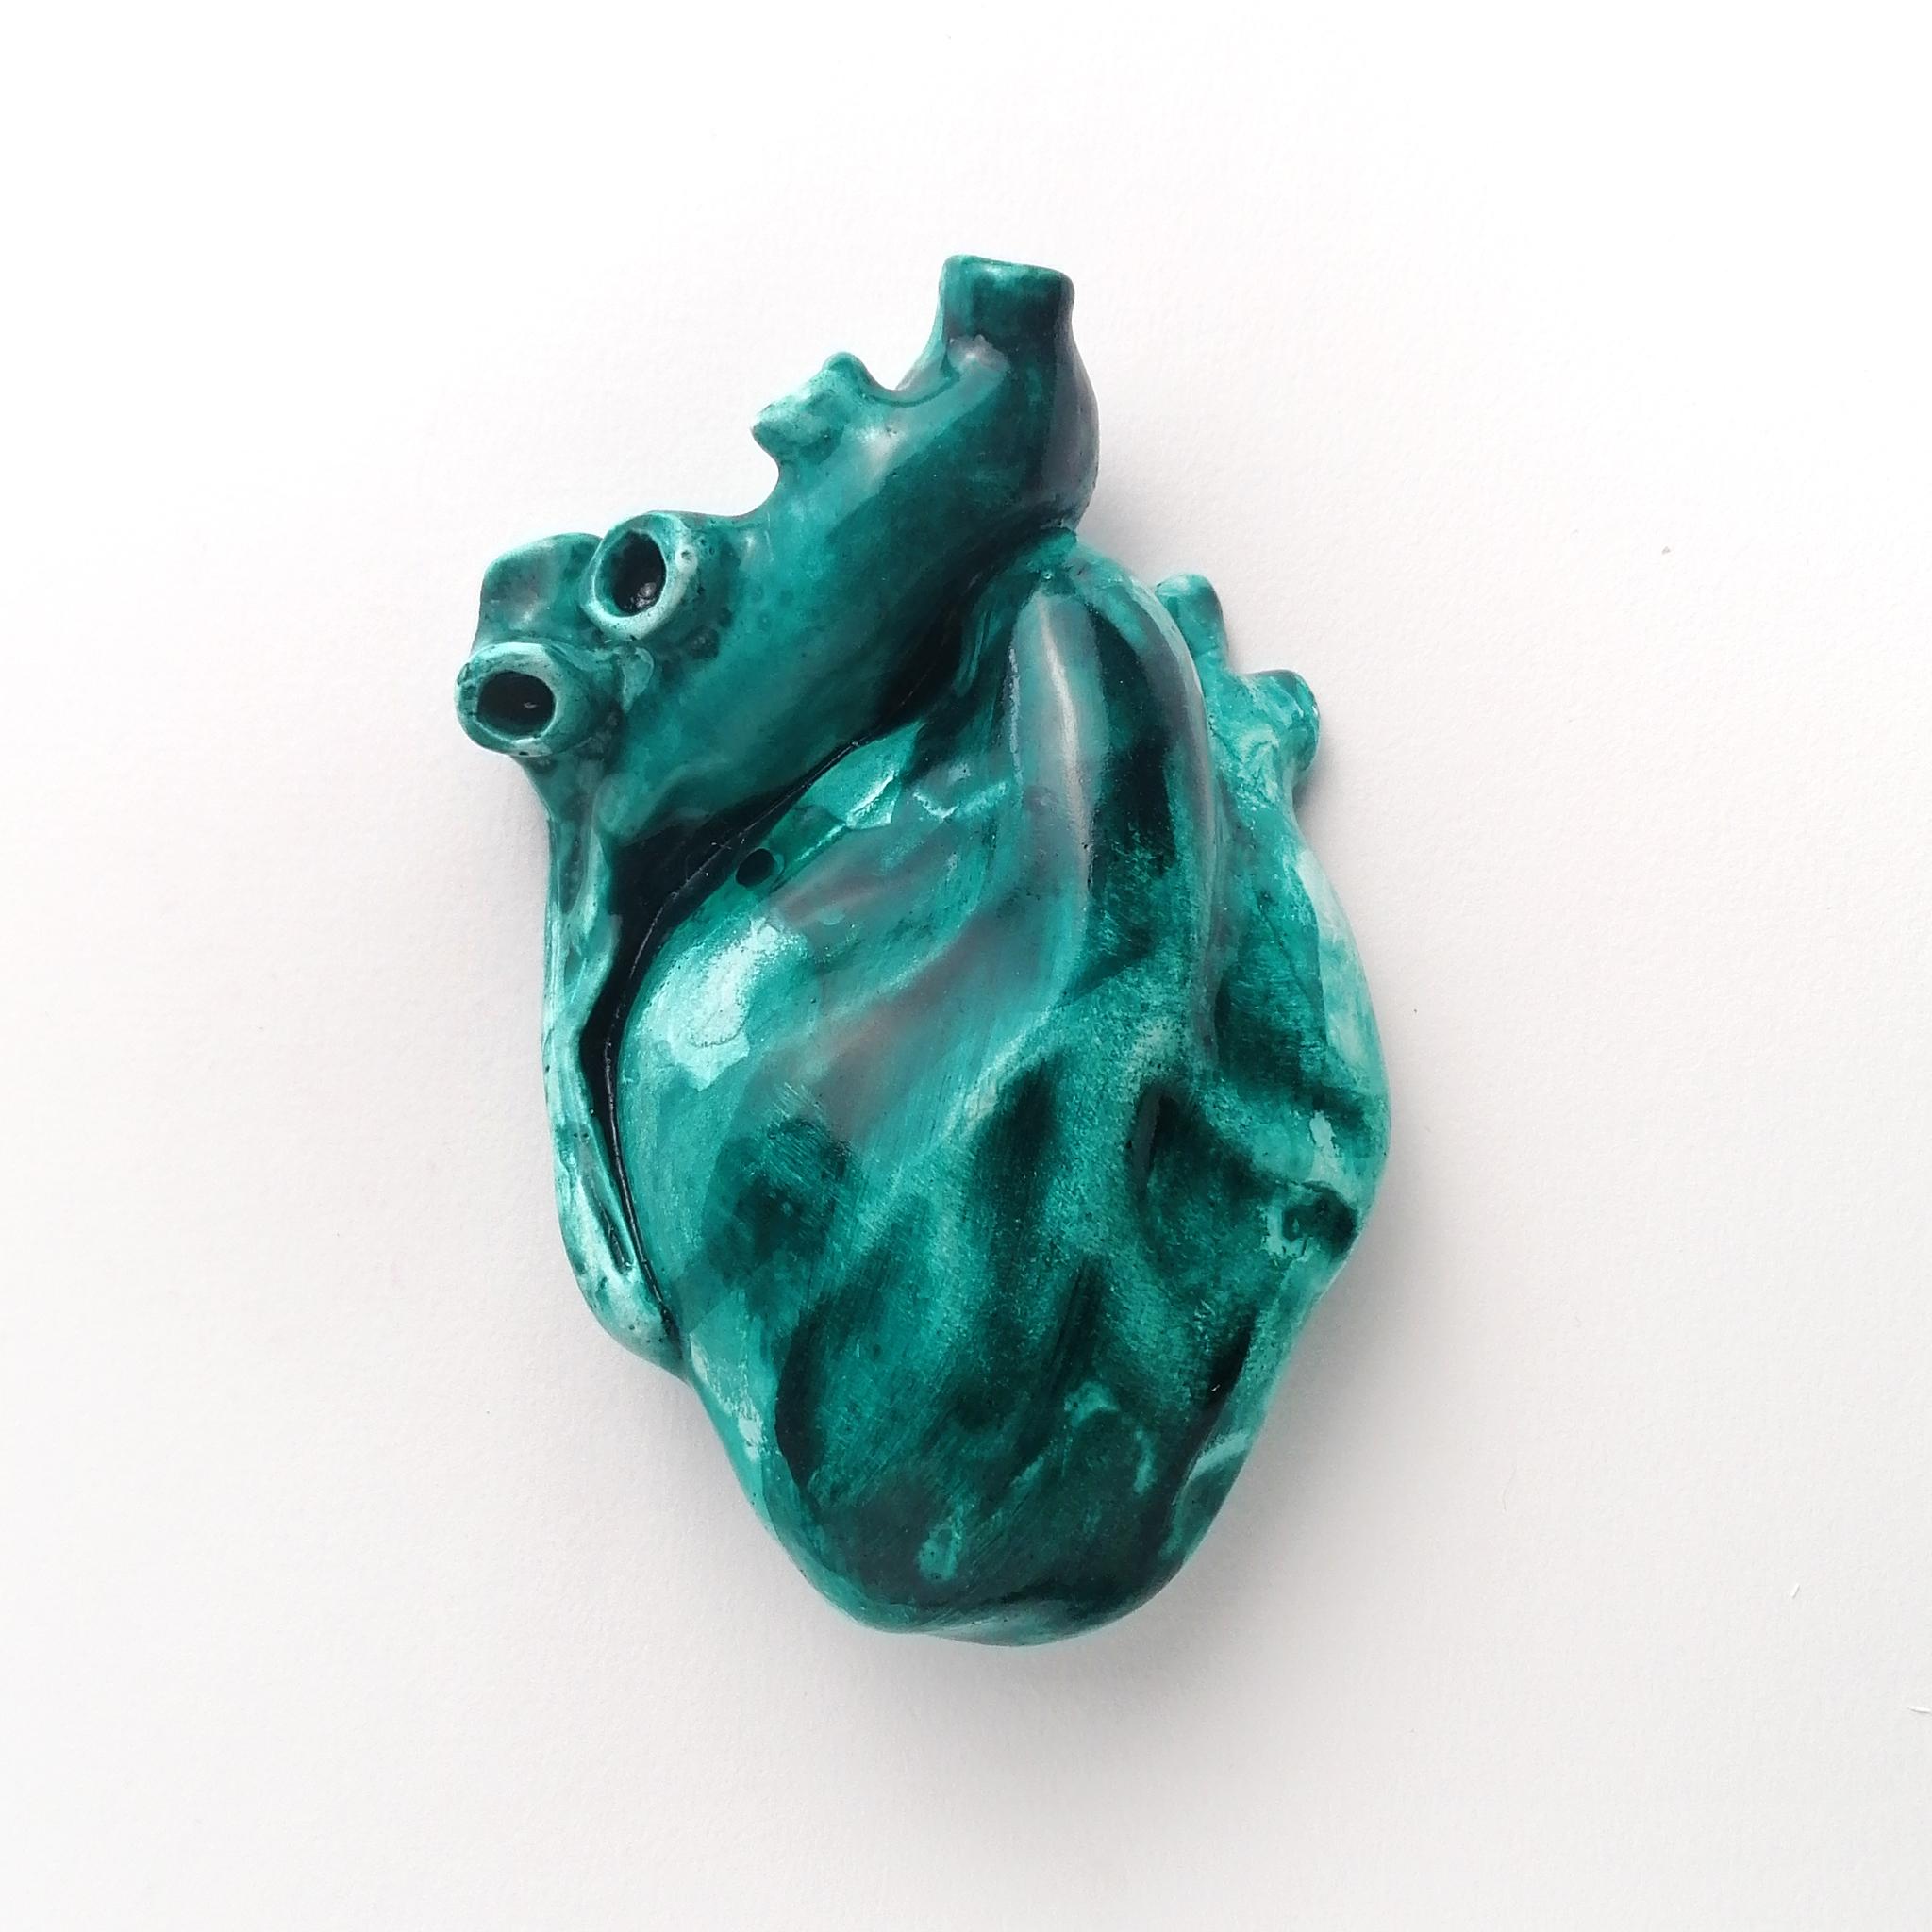 Celebrating the human body by dissecting it. The human body as a great system of signs and symbols. We are expression, beyond words and gestures. 

A perspective of the flesh in which certain parts become containers. 
Here then are hearts made